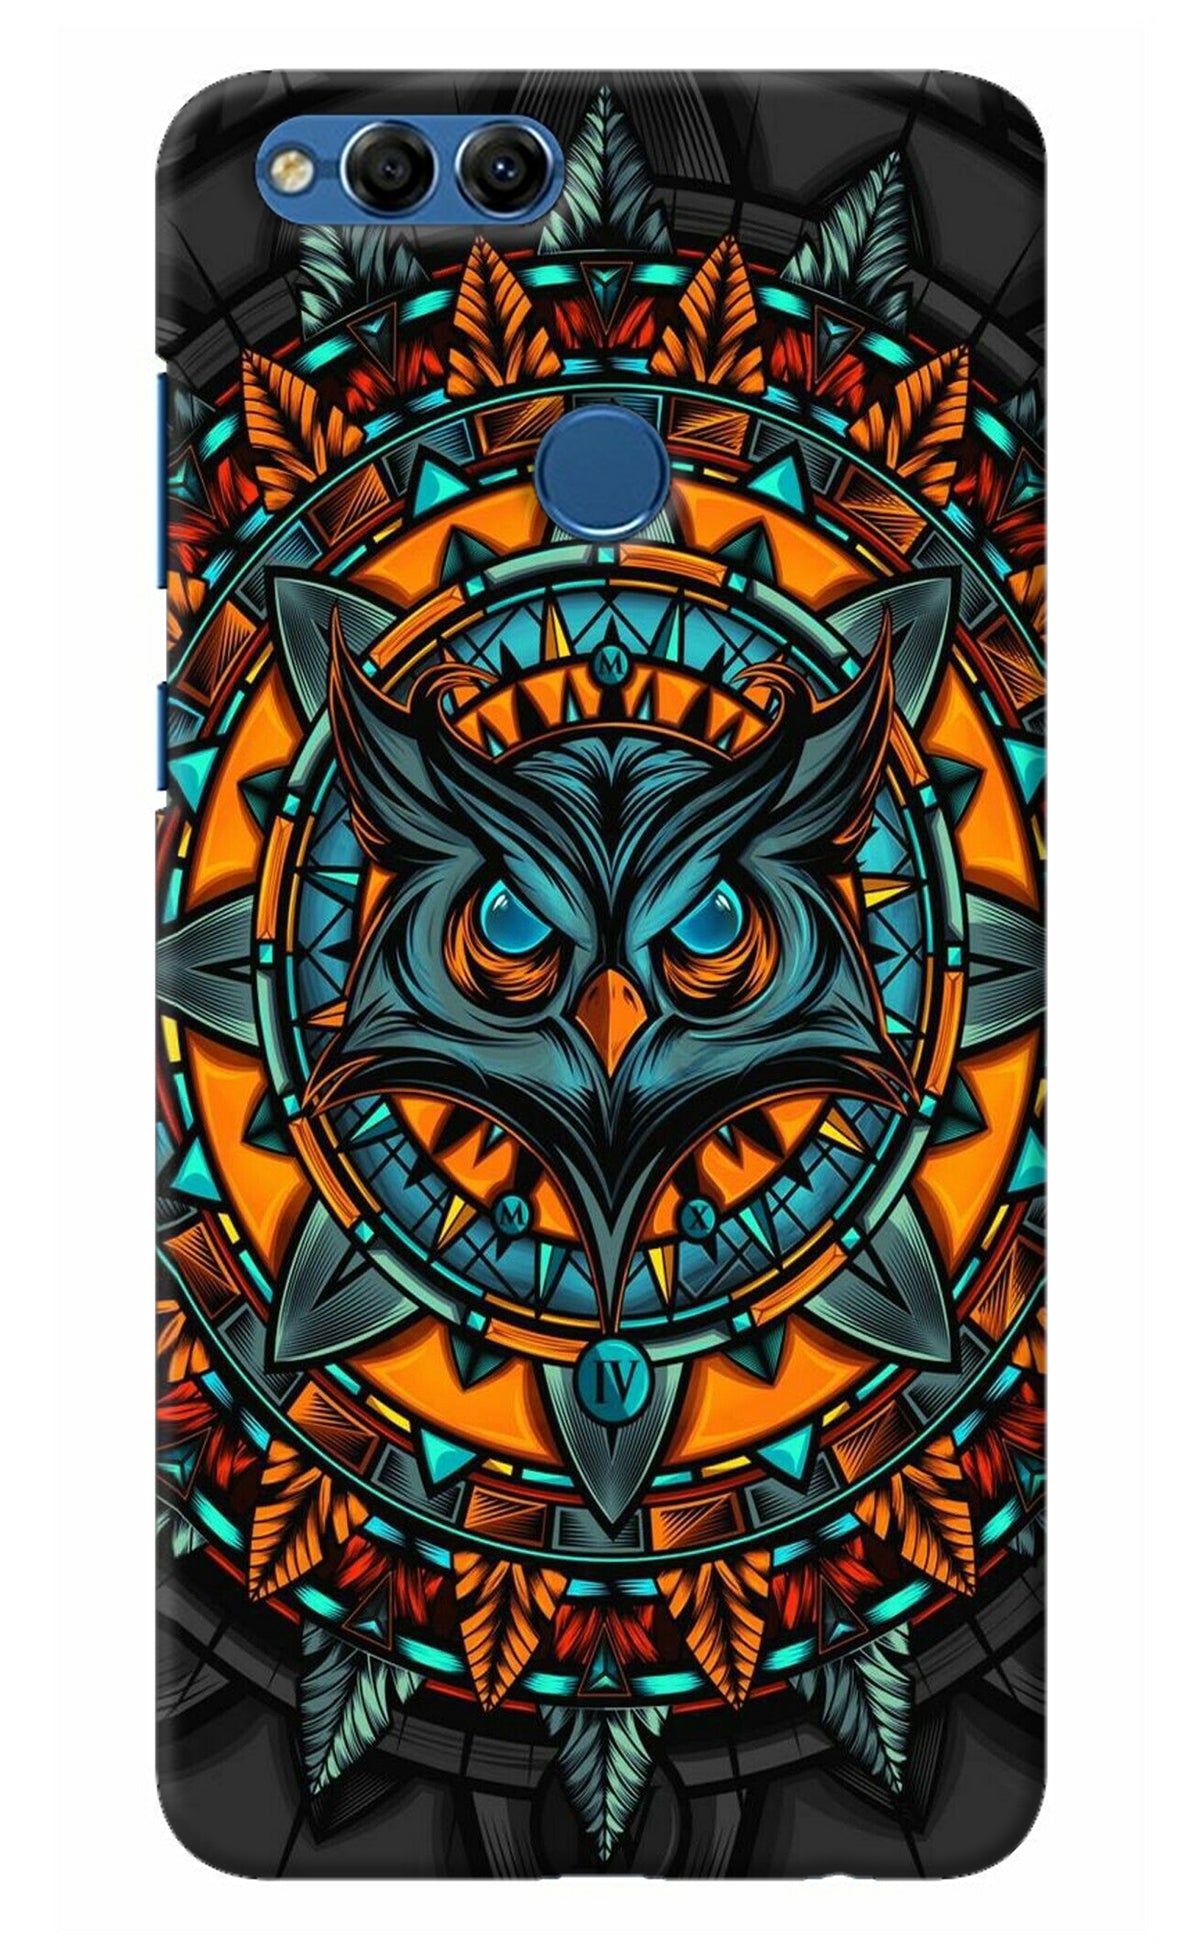 Angry Owl Art Honor 7X Back Cover